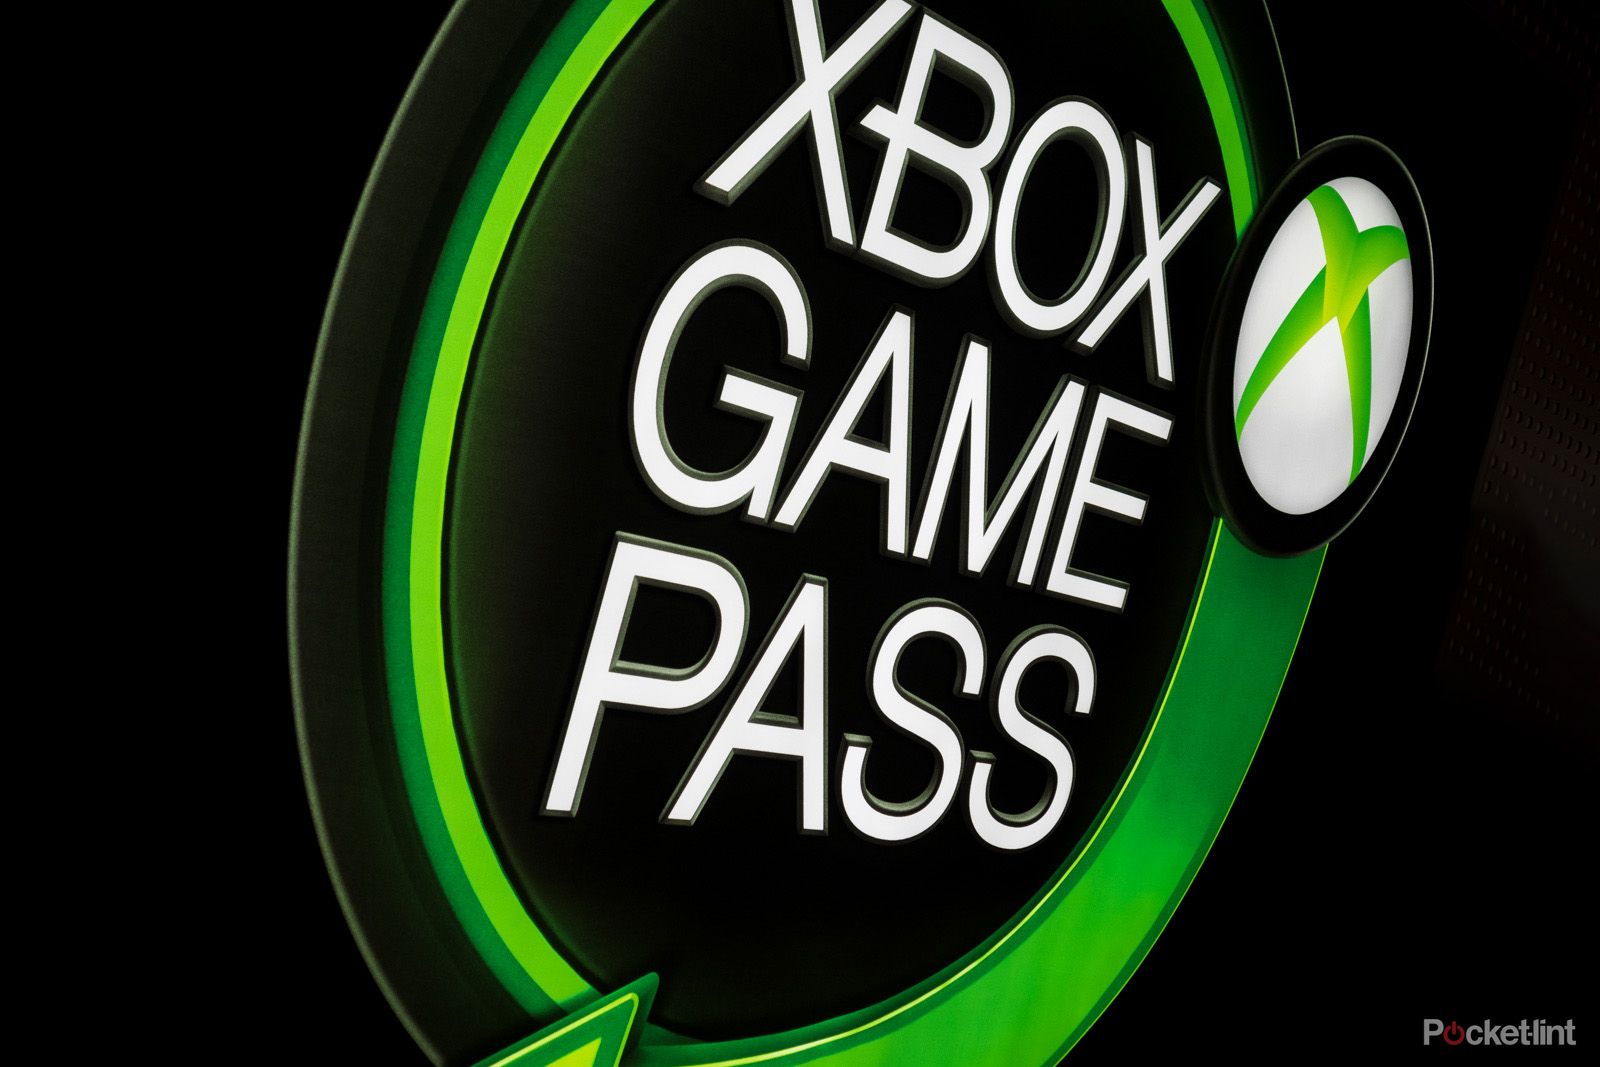 Microsoft's Xbox Game Pass trial offer is no longer, well, offered